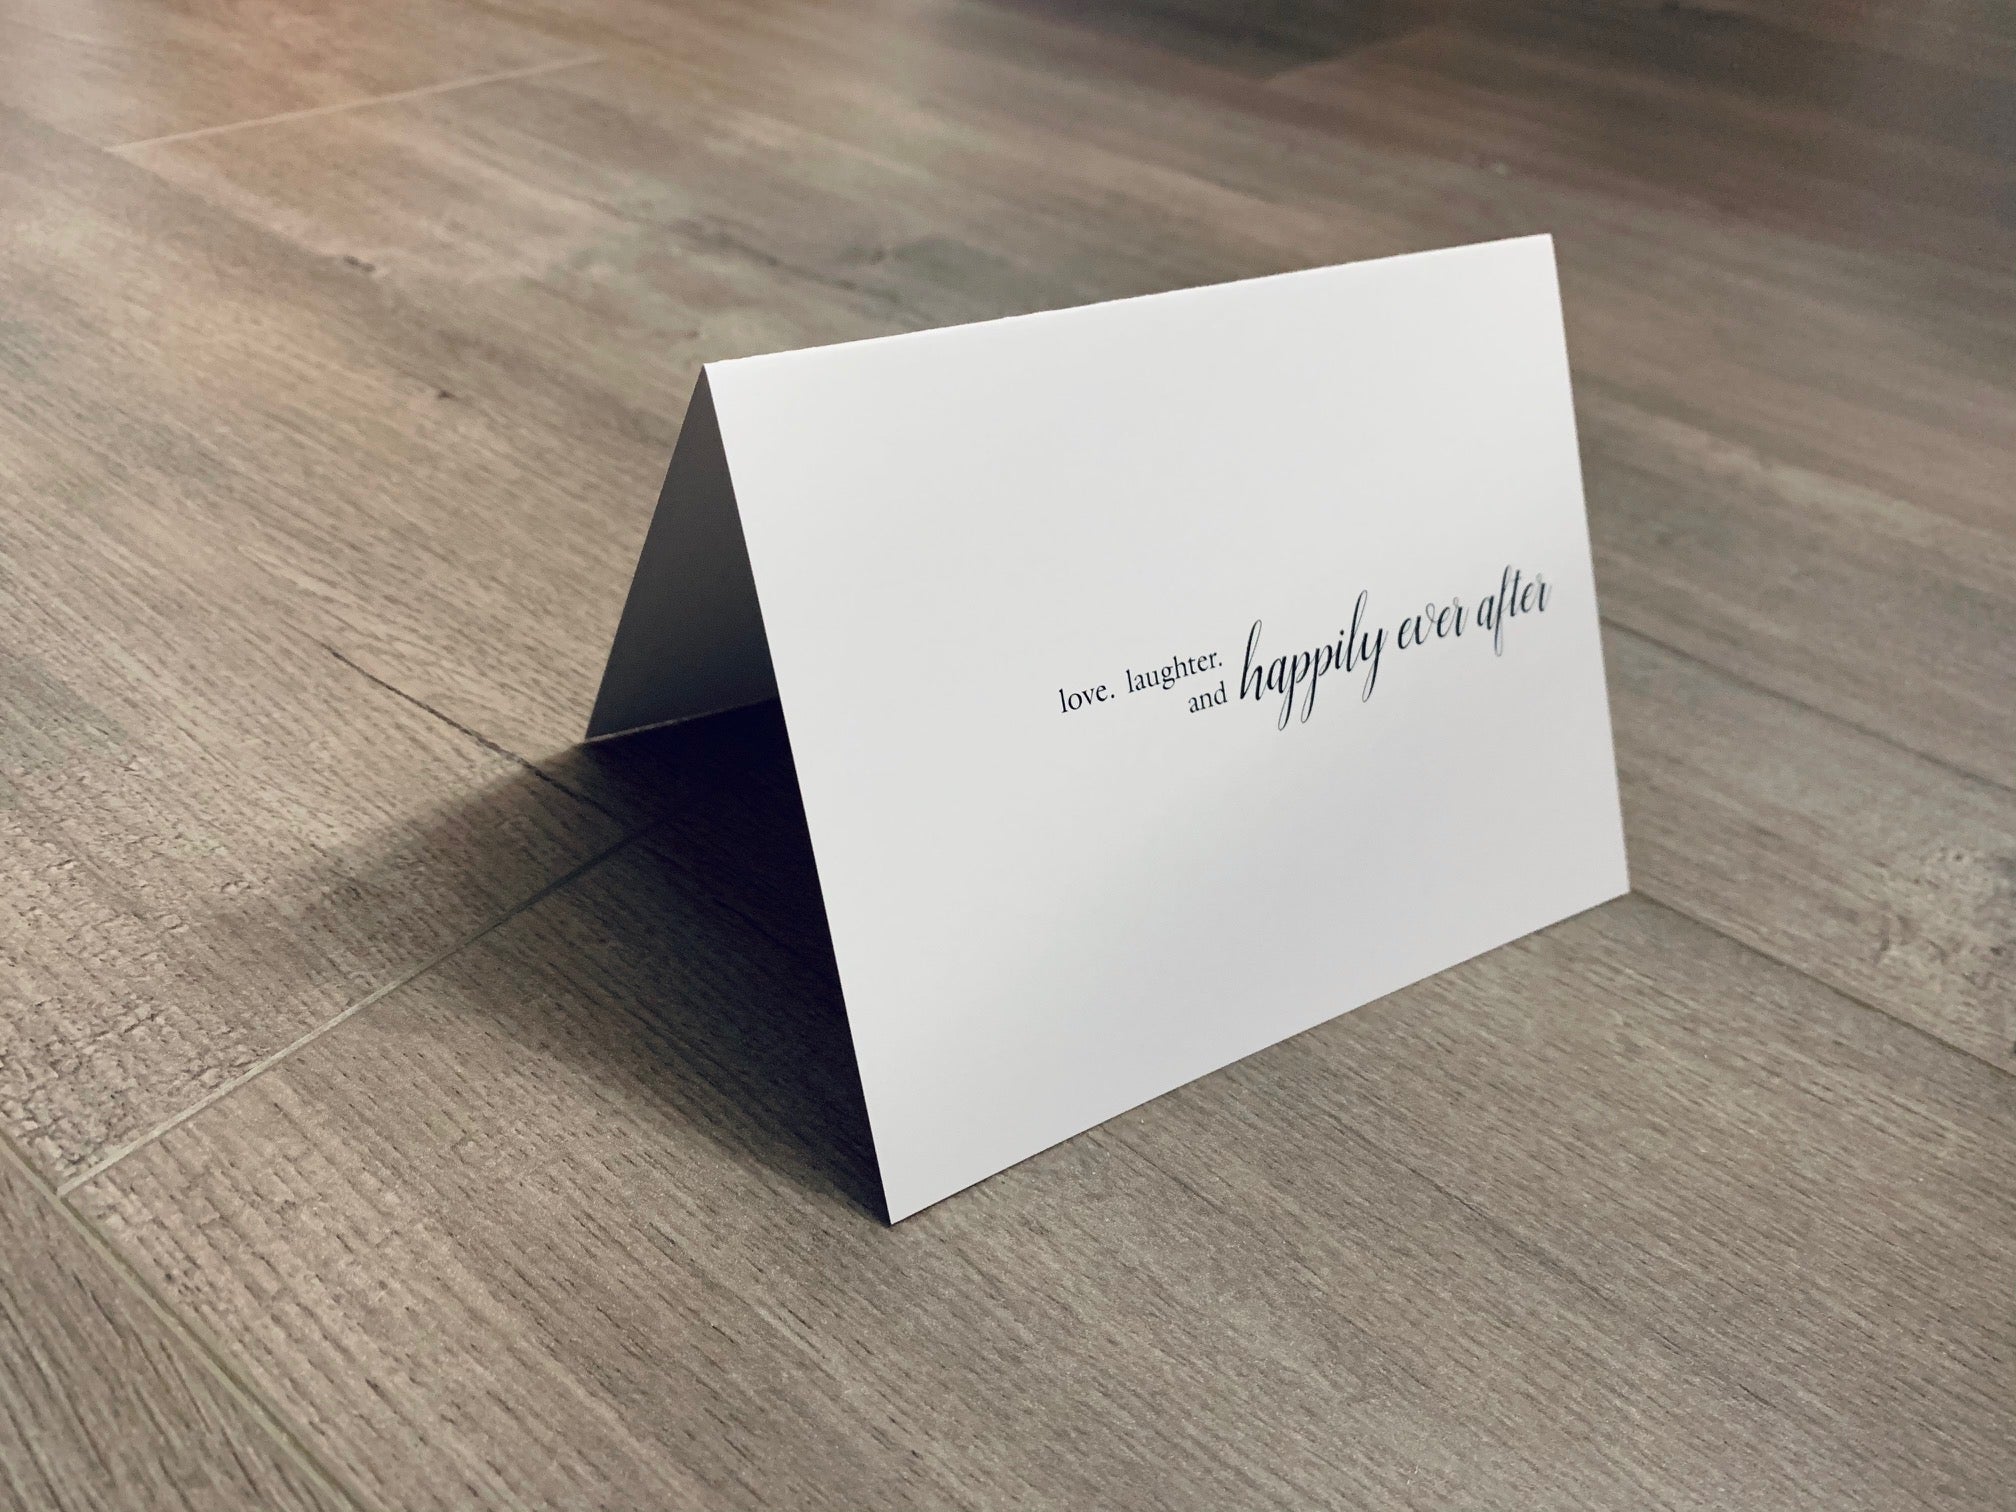 A white card that reads, "love, laughter and happily ever after" in black ink is folded and propped up on a wooden floor. Bridal and wedding card from Stationare.